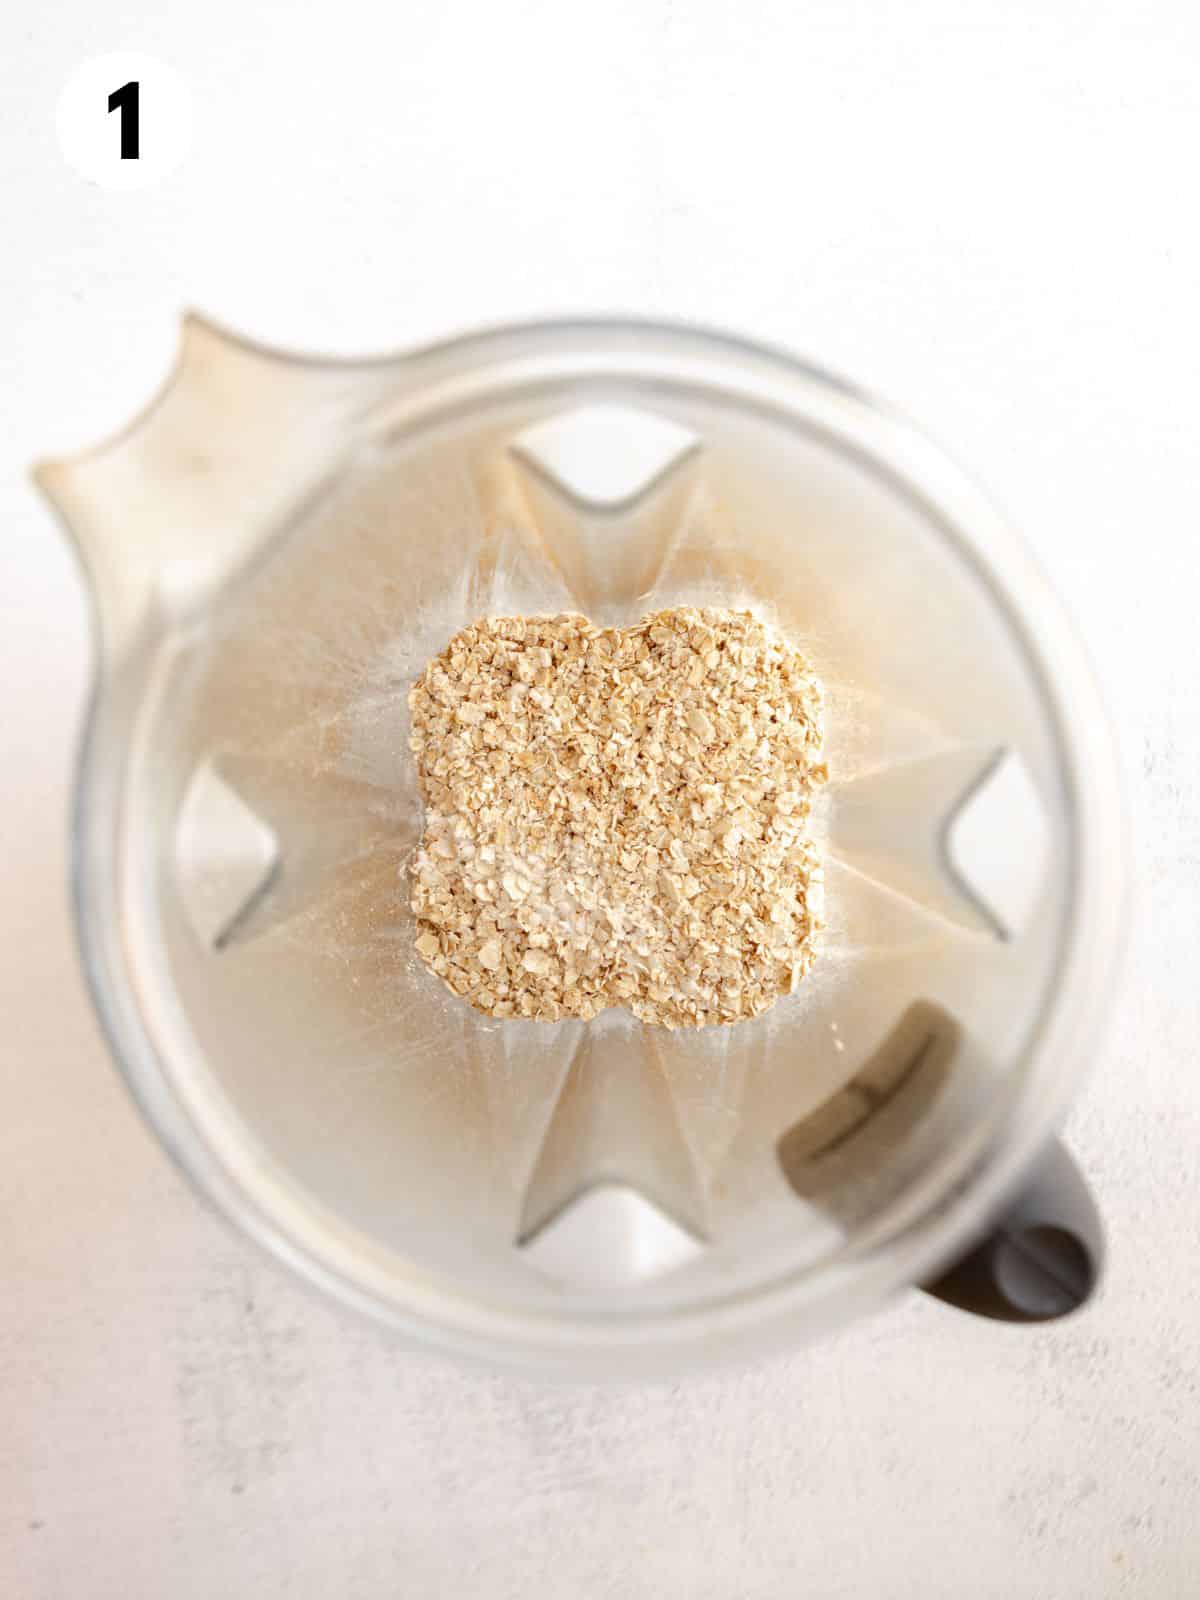 Oats and other ingredients in a blender.